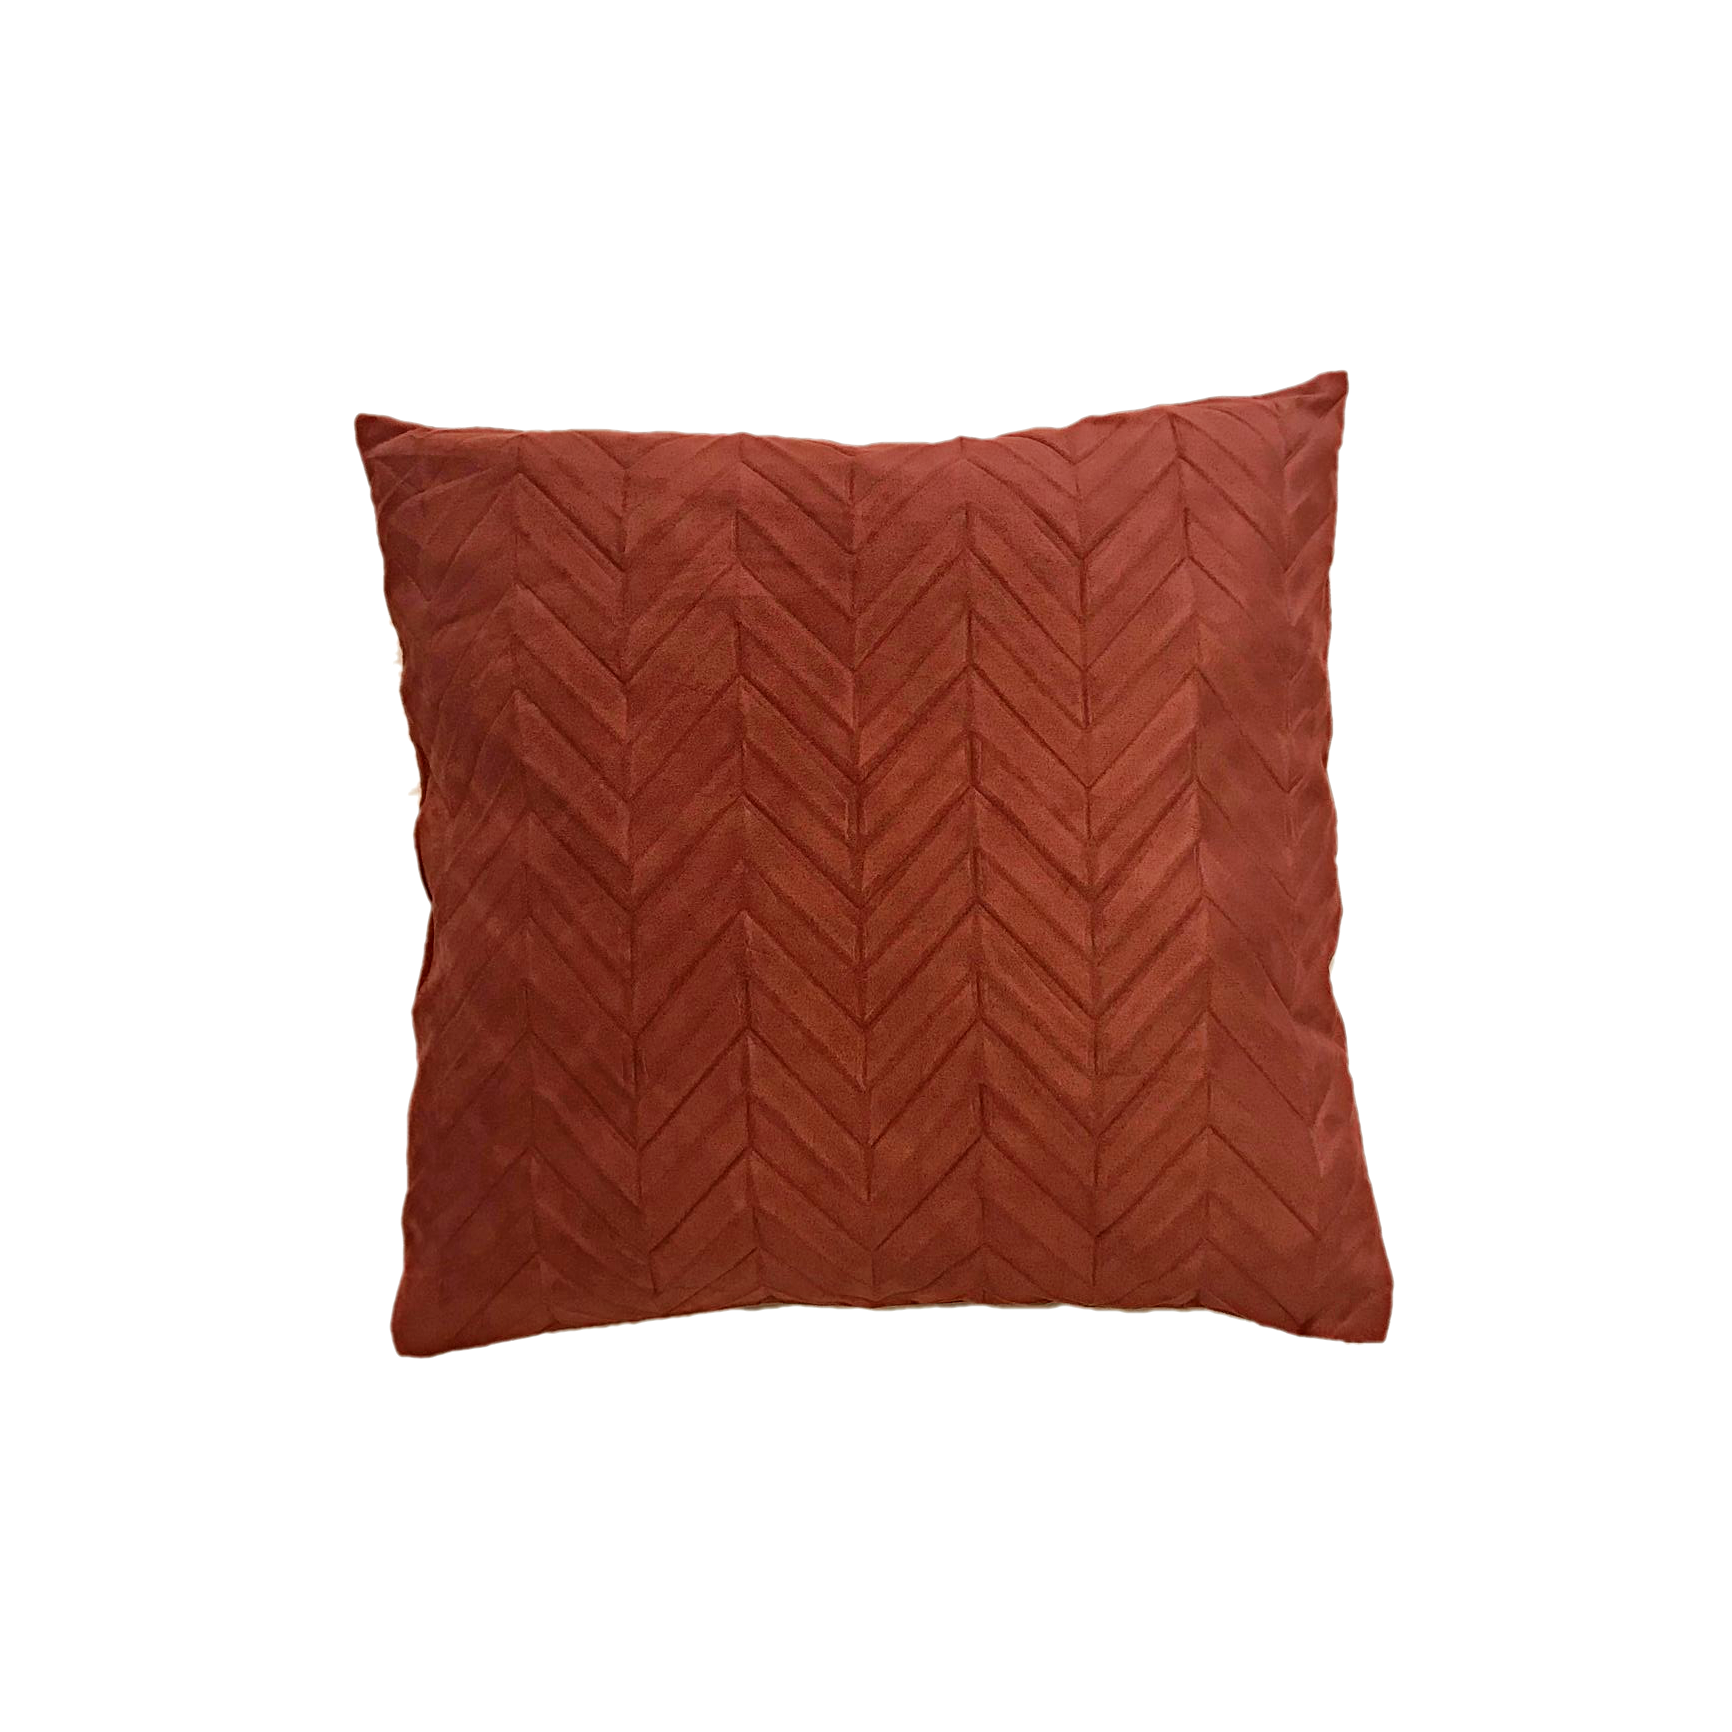 The Mirage Cushion - choice of colors